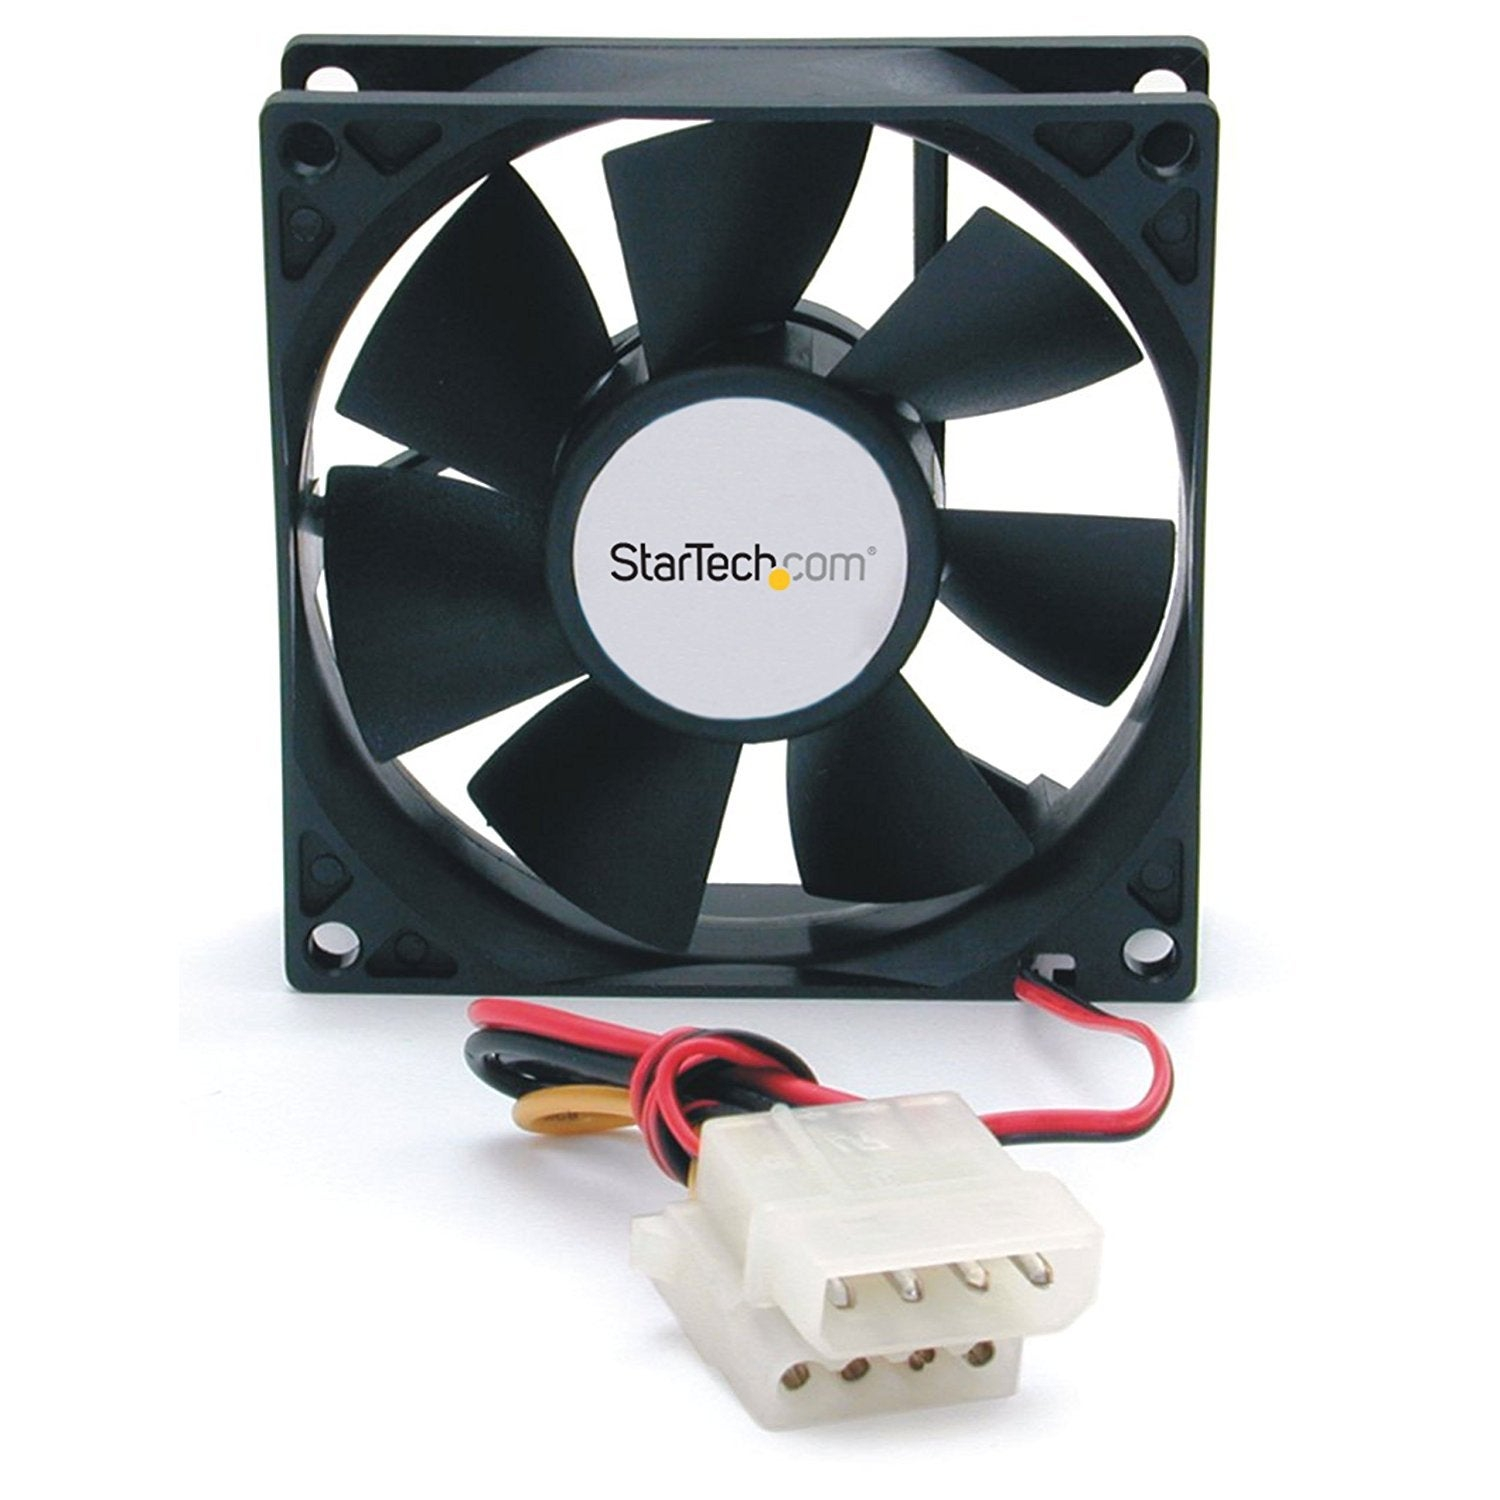 Startech Fanbox 80x25mm Dual Ball Bearing Computer Case Fan W Lp4 Connector pertaining to dimensions 1500 X 1500